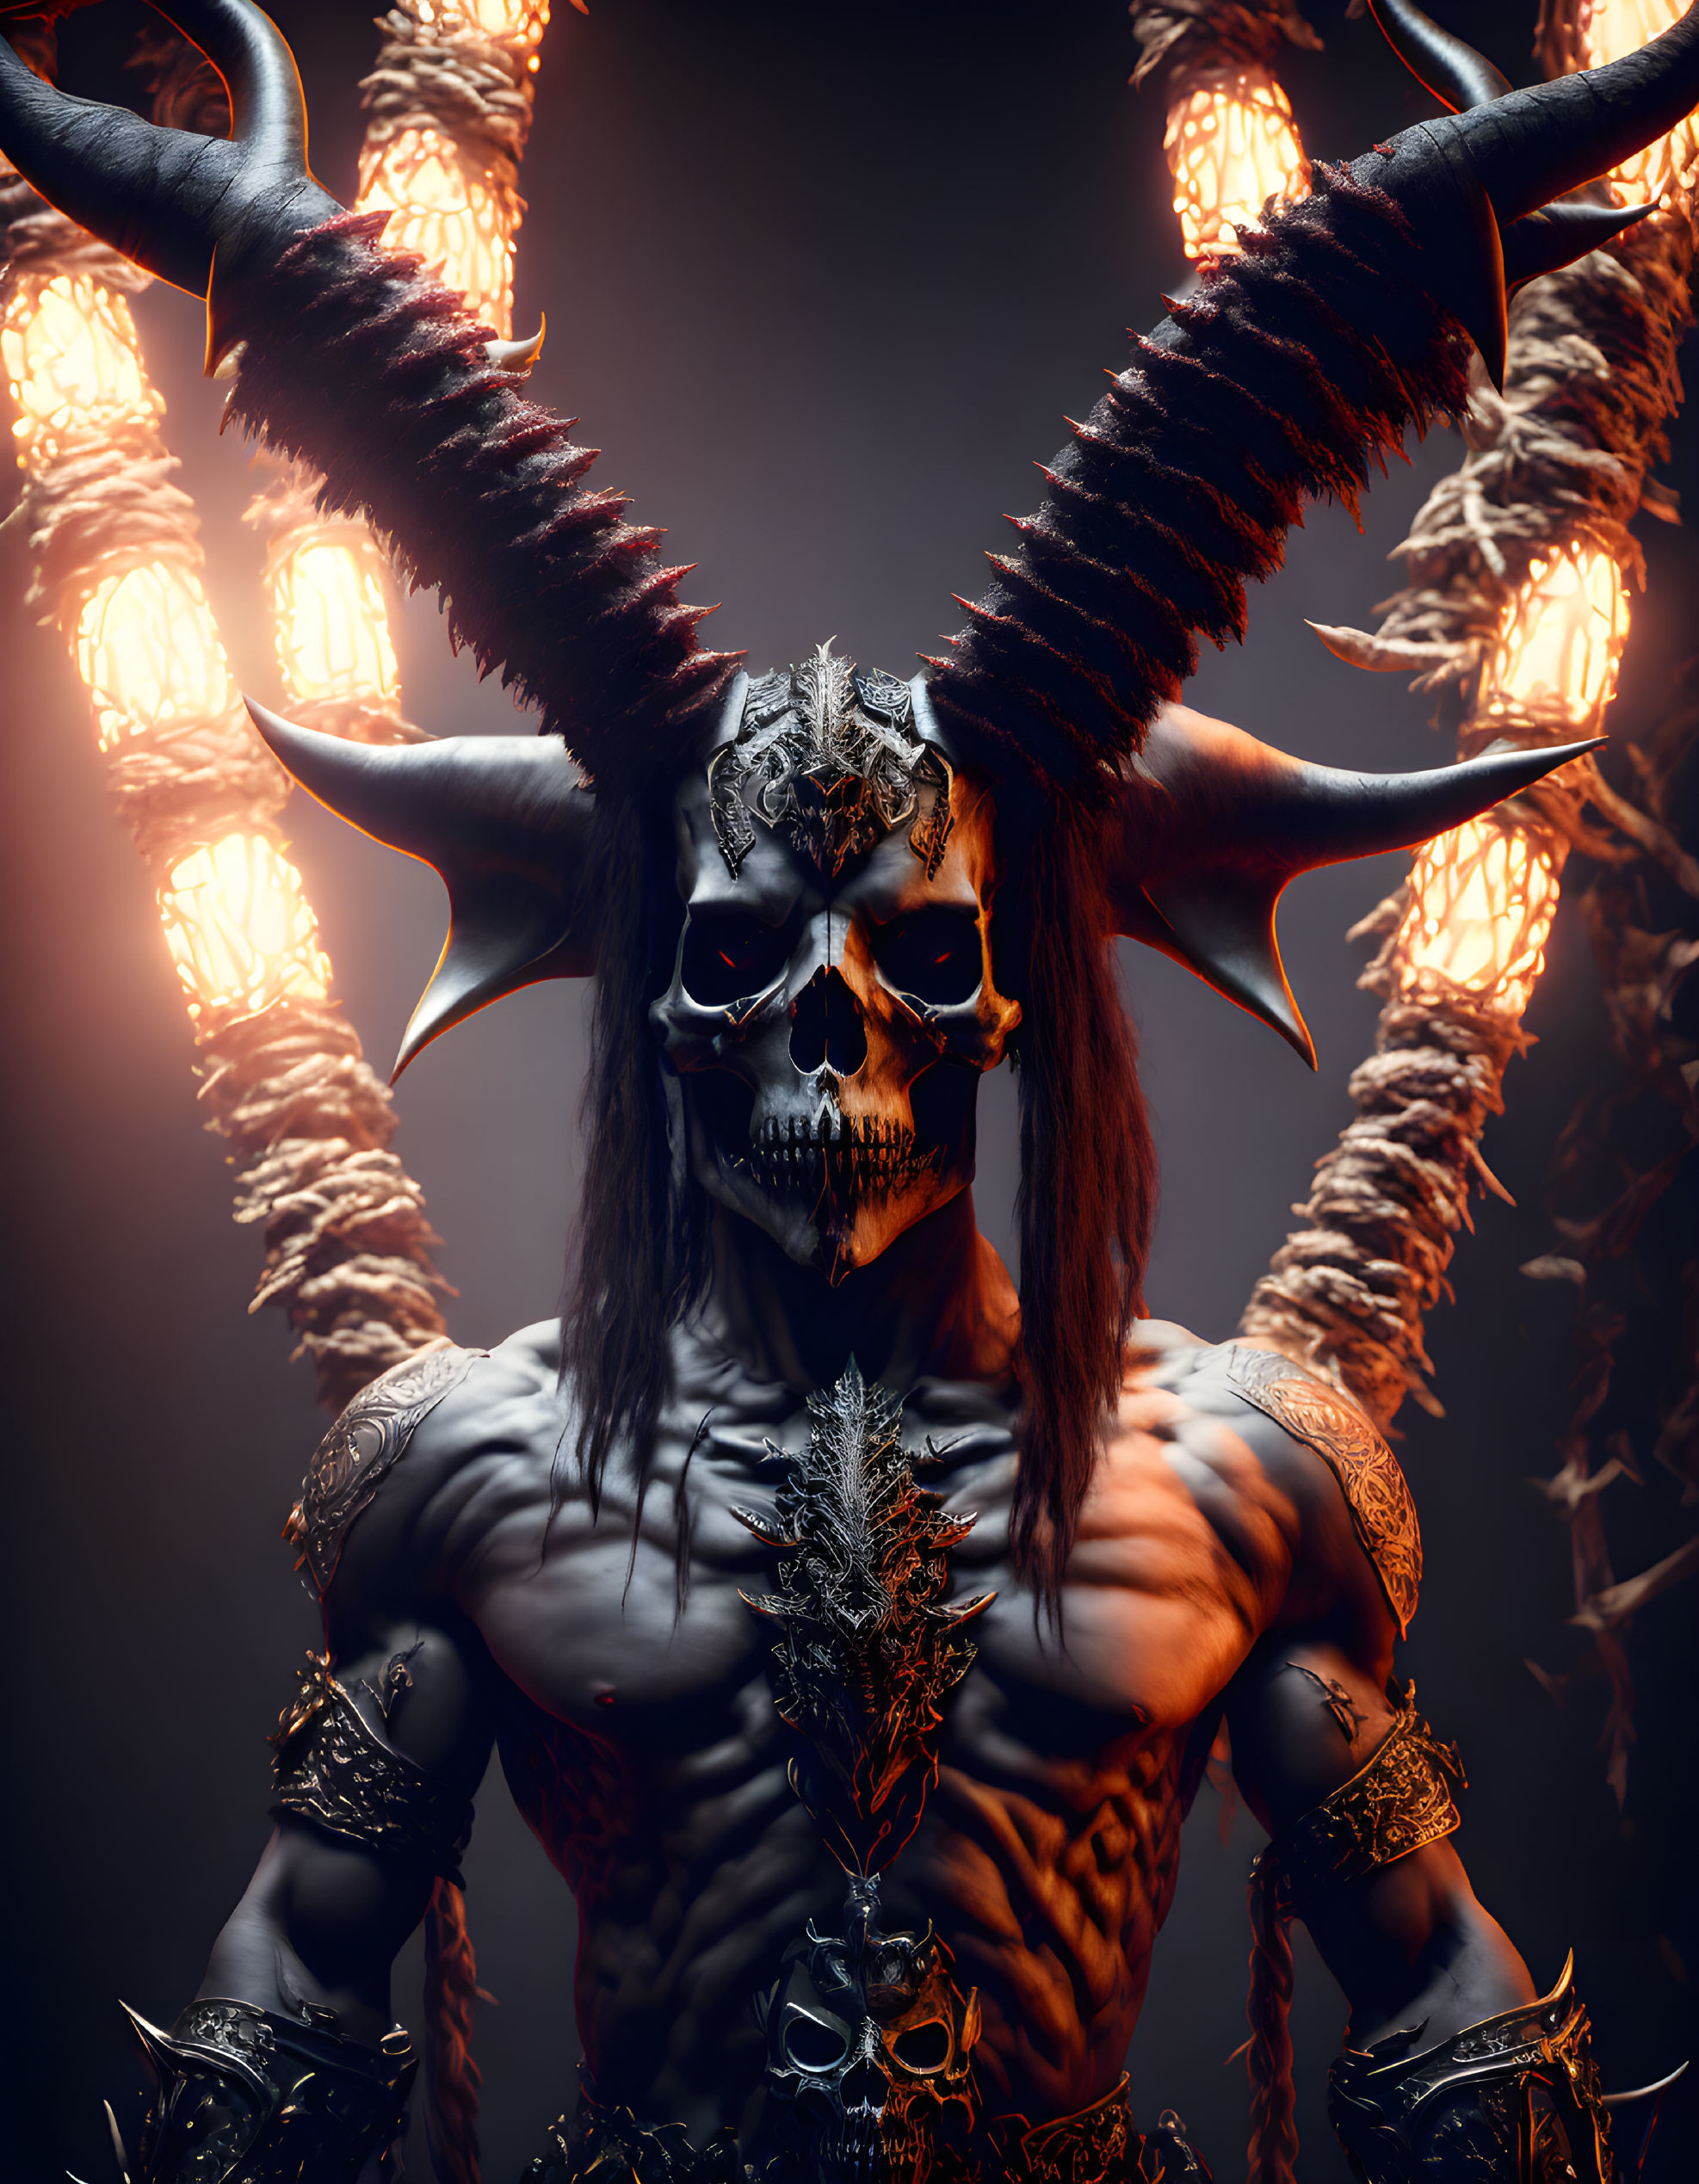 Person in Skull Mask with Horns and Armor Poses Dramatically